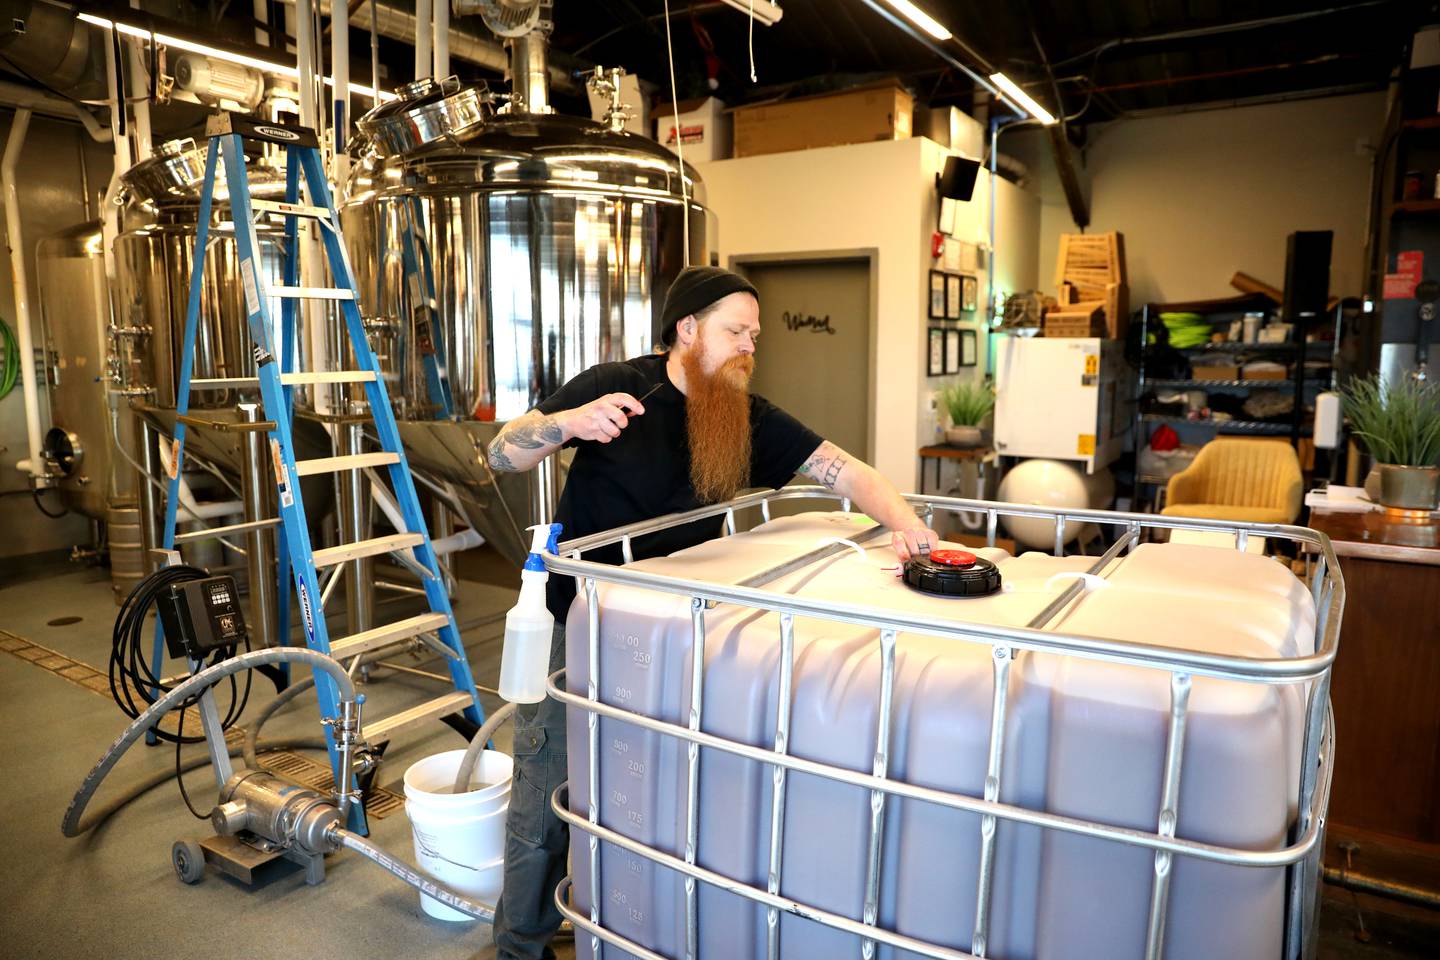 Obscurity cider and mead maker Zak Beckman hooks up apple juice at the Obscurity Mead Hall and Cidery in Elburn.